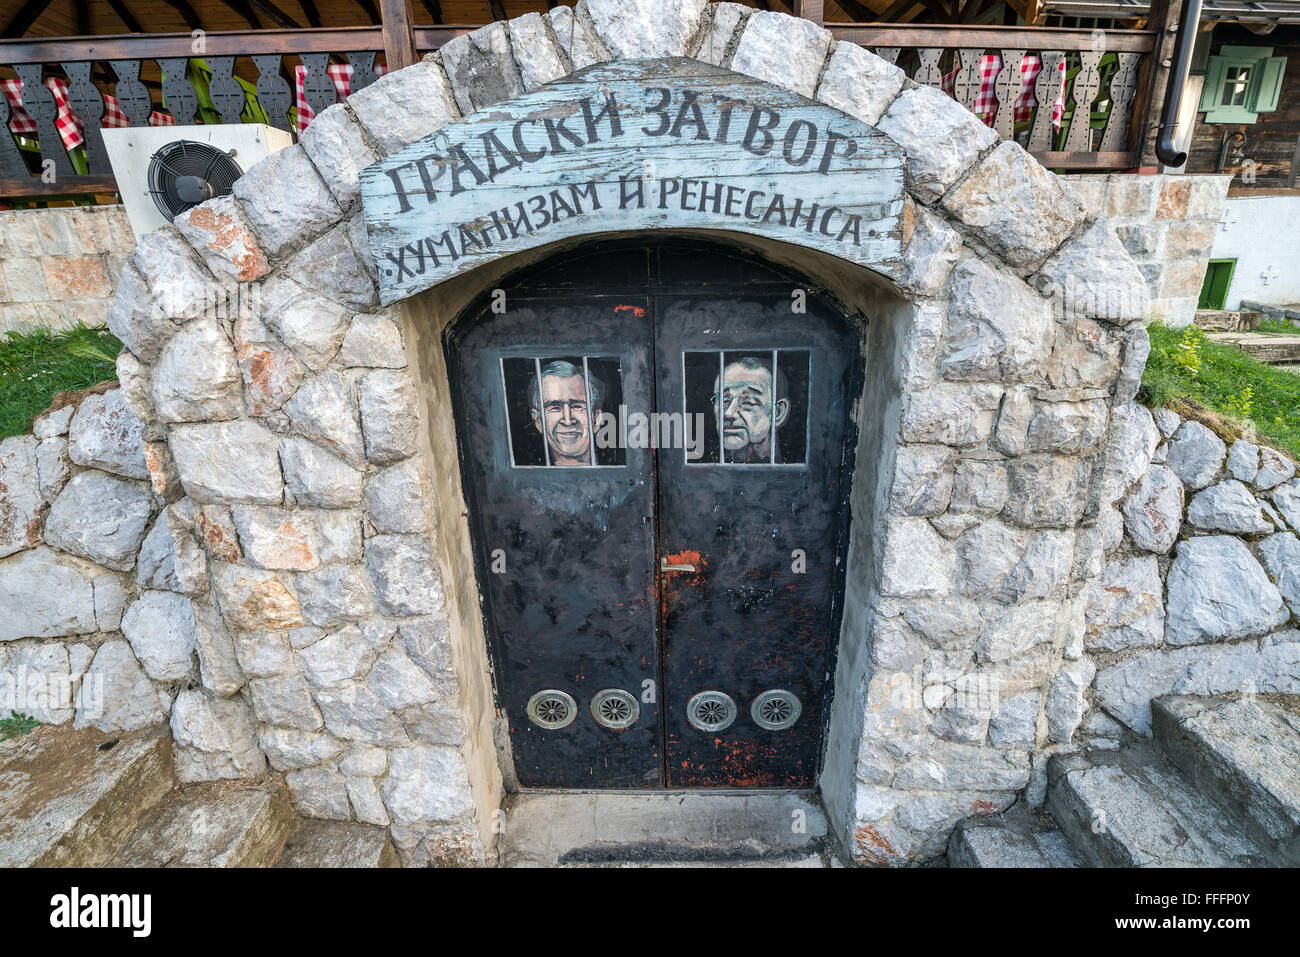 Prison 'City Jail - Humanism and renaissance' with George W. Bush and Javier Solana portraits in Drvengrad village, Serbia Stock Photo